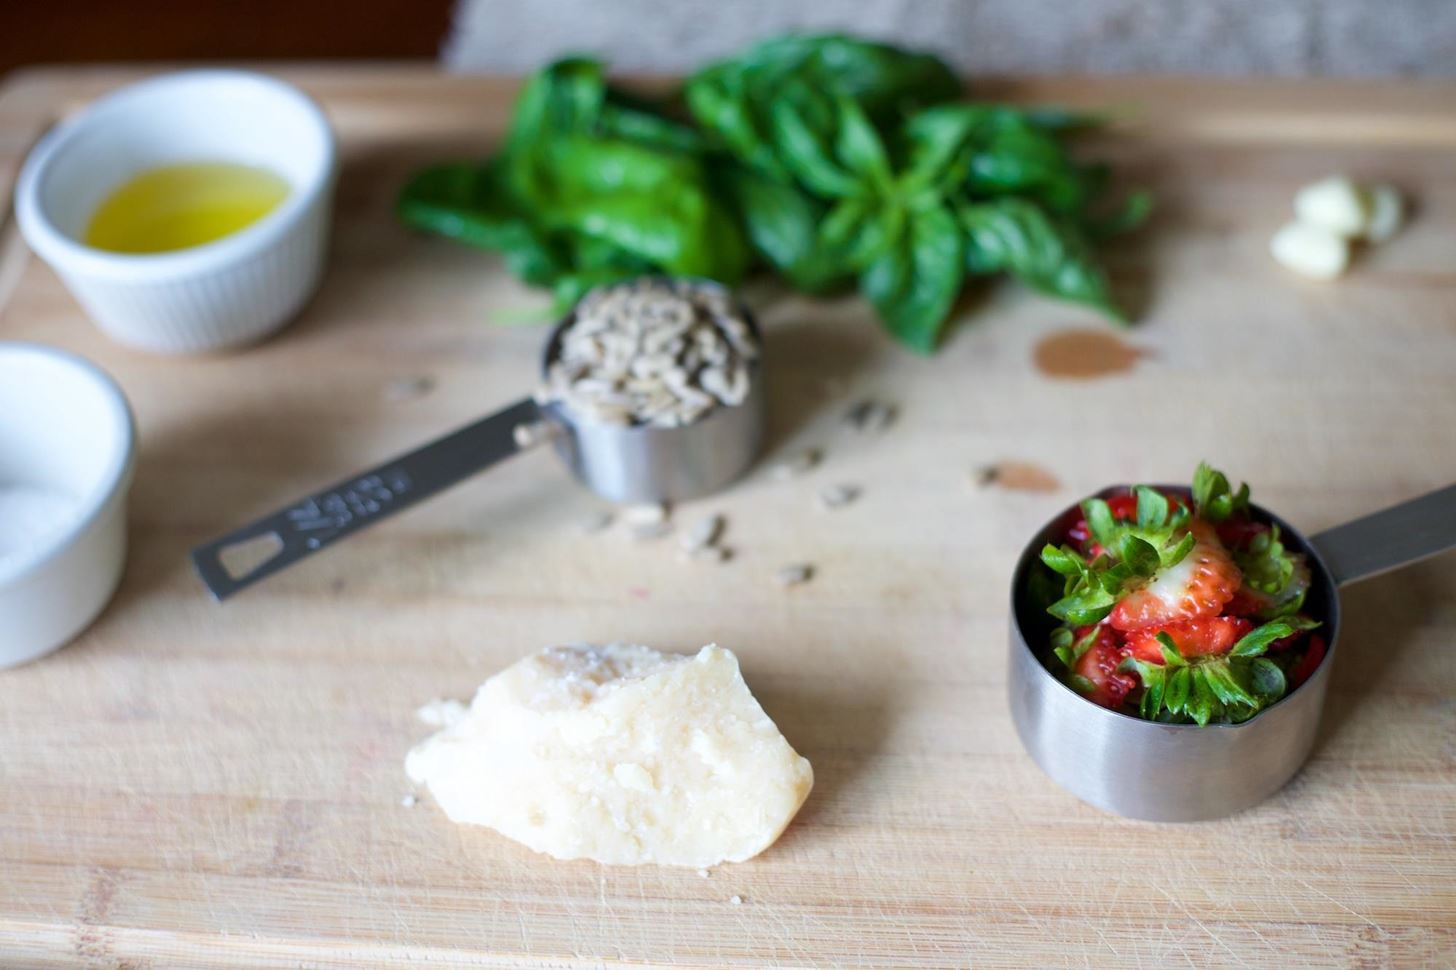 Strawberry Stems Aren't Waste—They're Perfect for Pesto